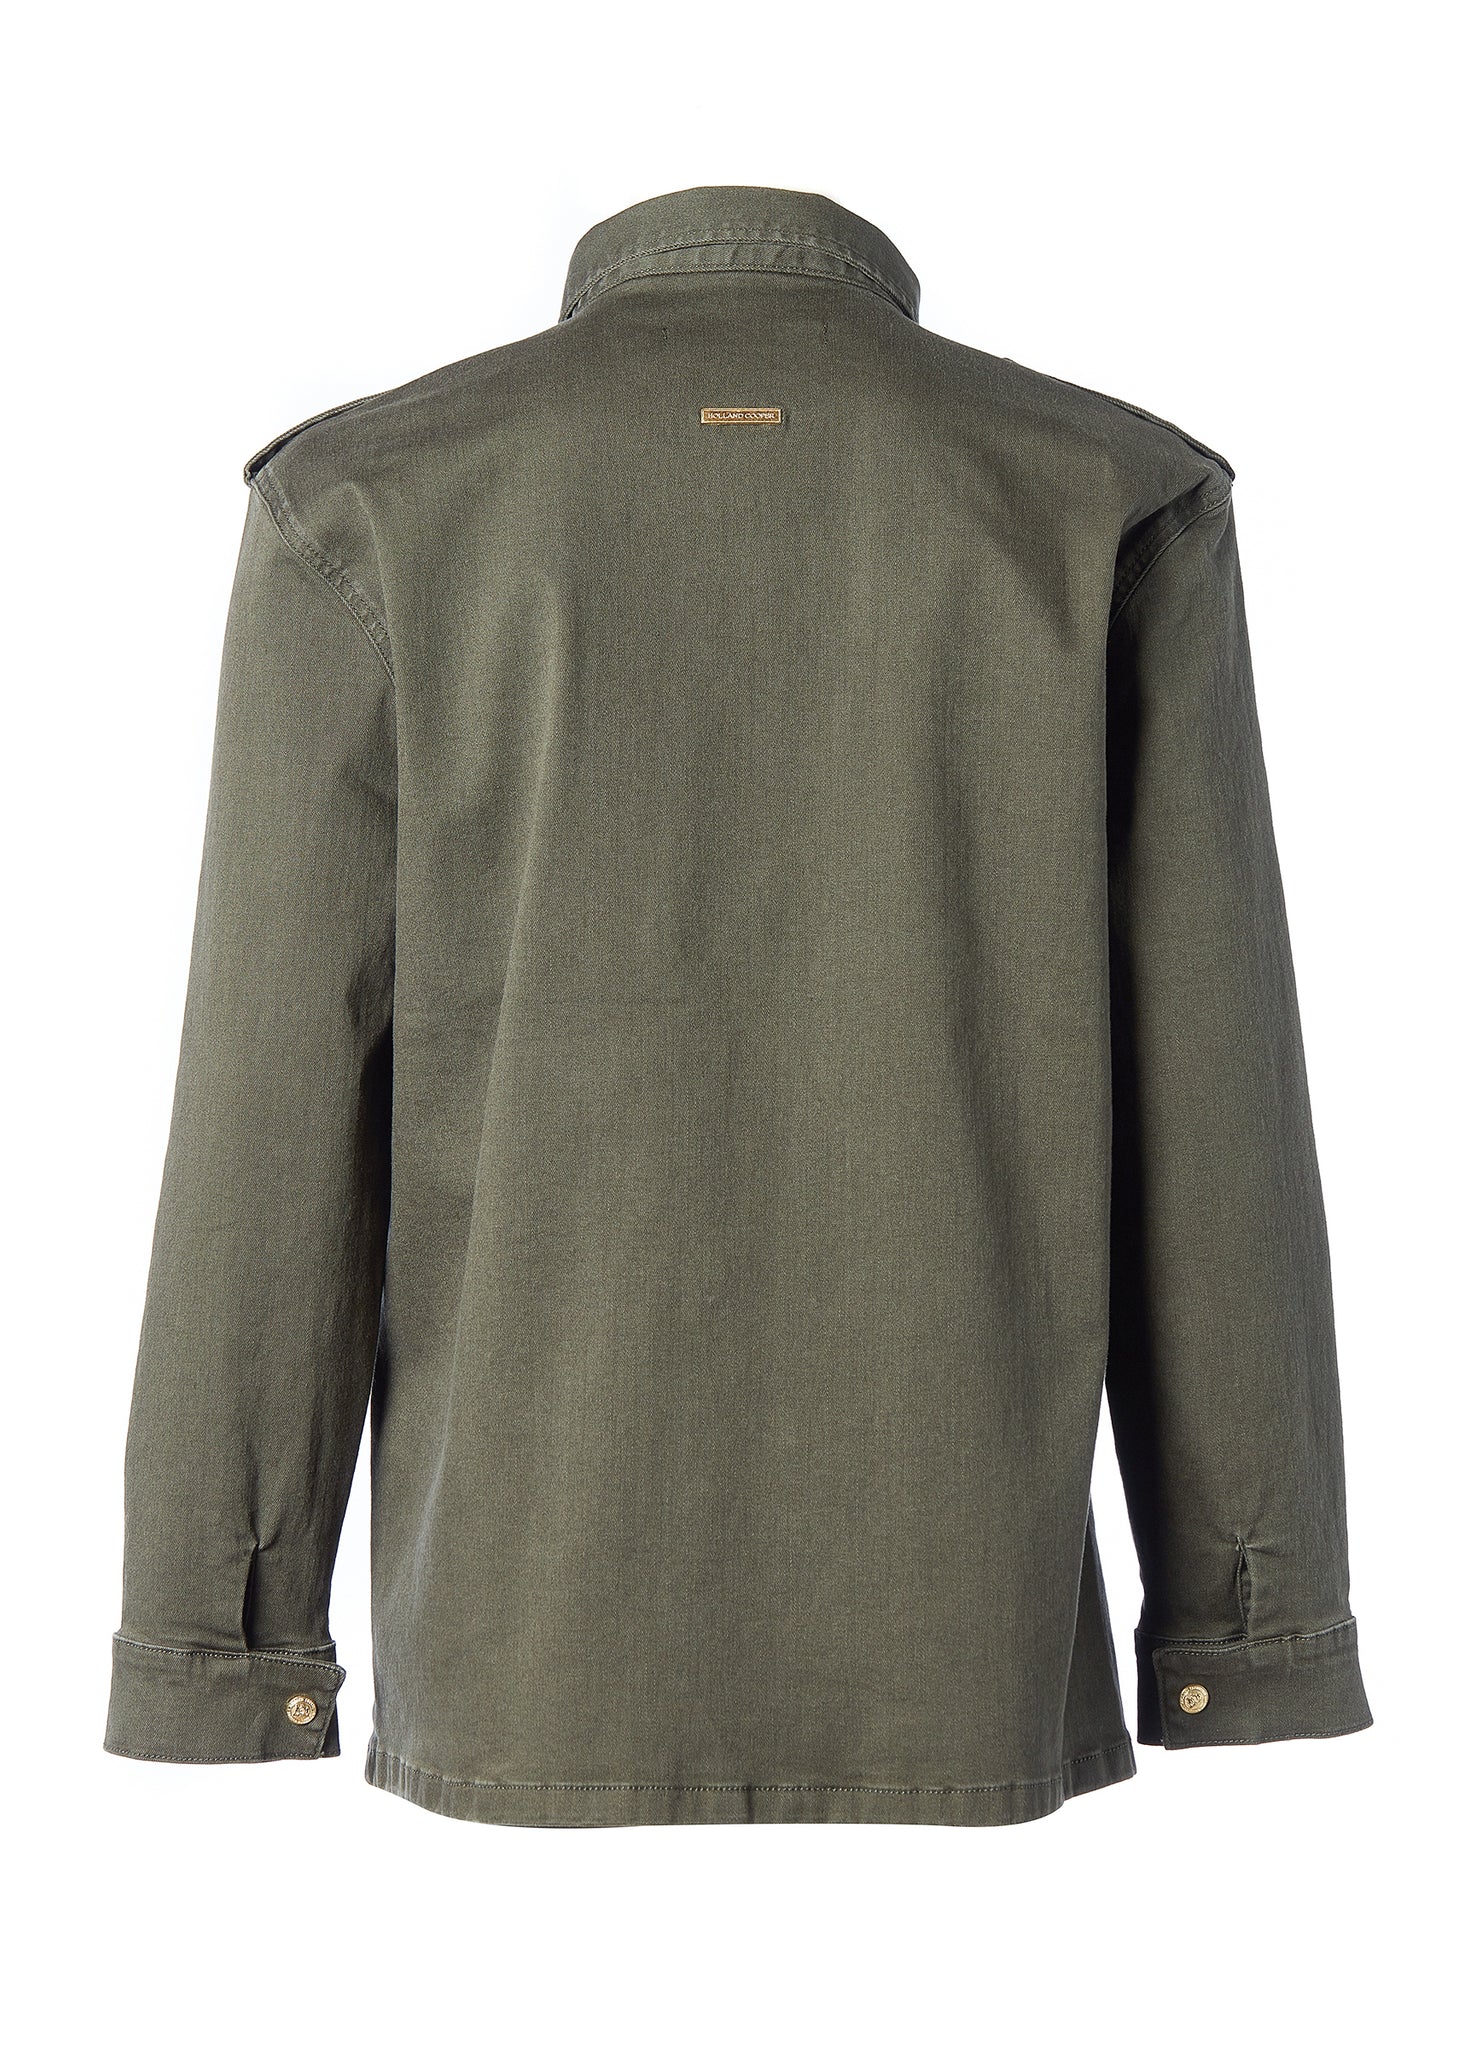 back of Relaxed fit collared artillery style jacket in khaki with four pockets two chest ones being box pleated  and two hip being patch pockets with gold jean button fastenings adjustable long sleeves and epaulette shoulder detail